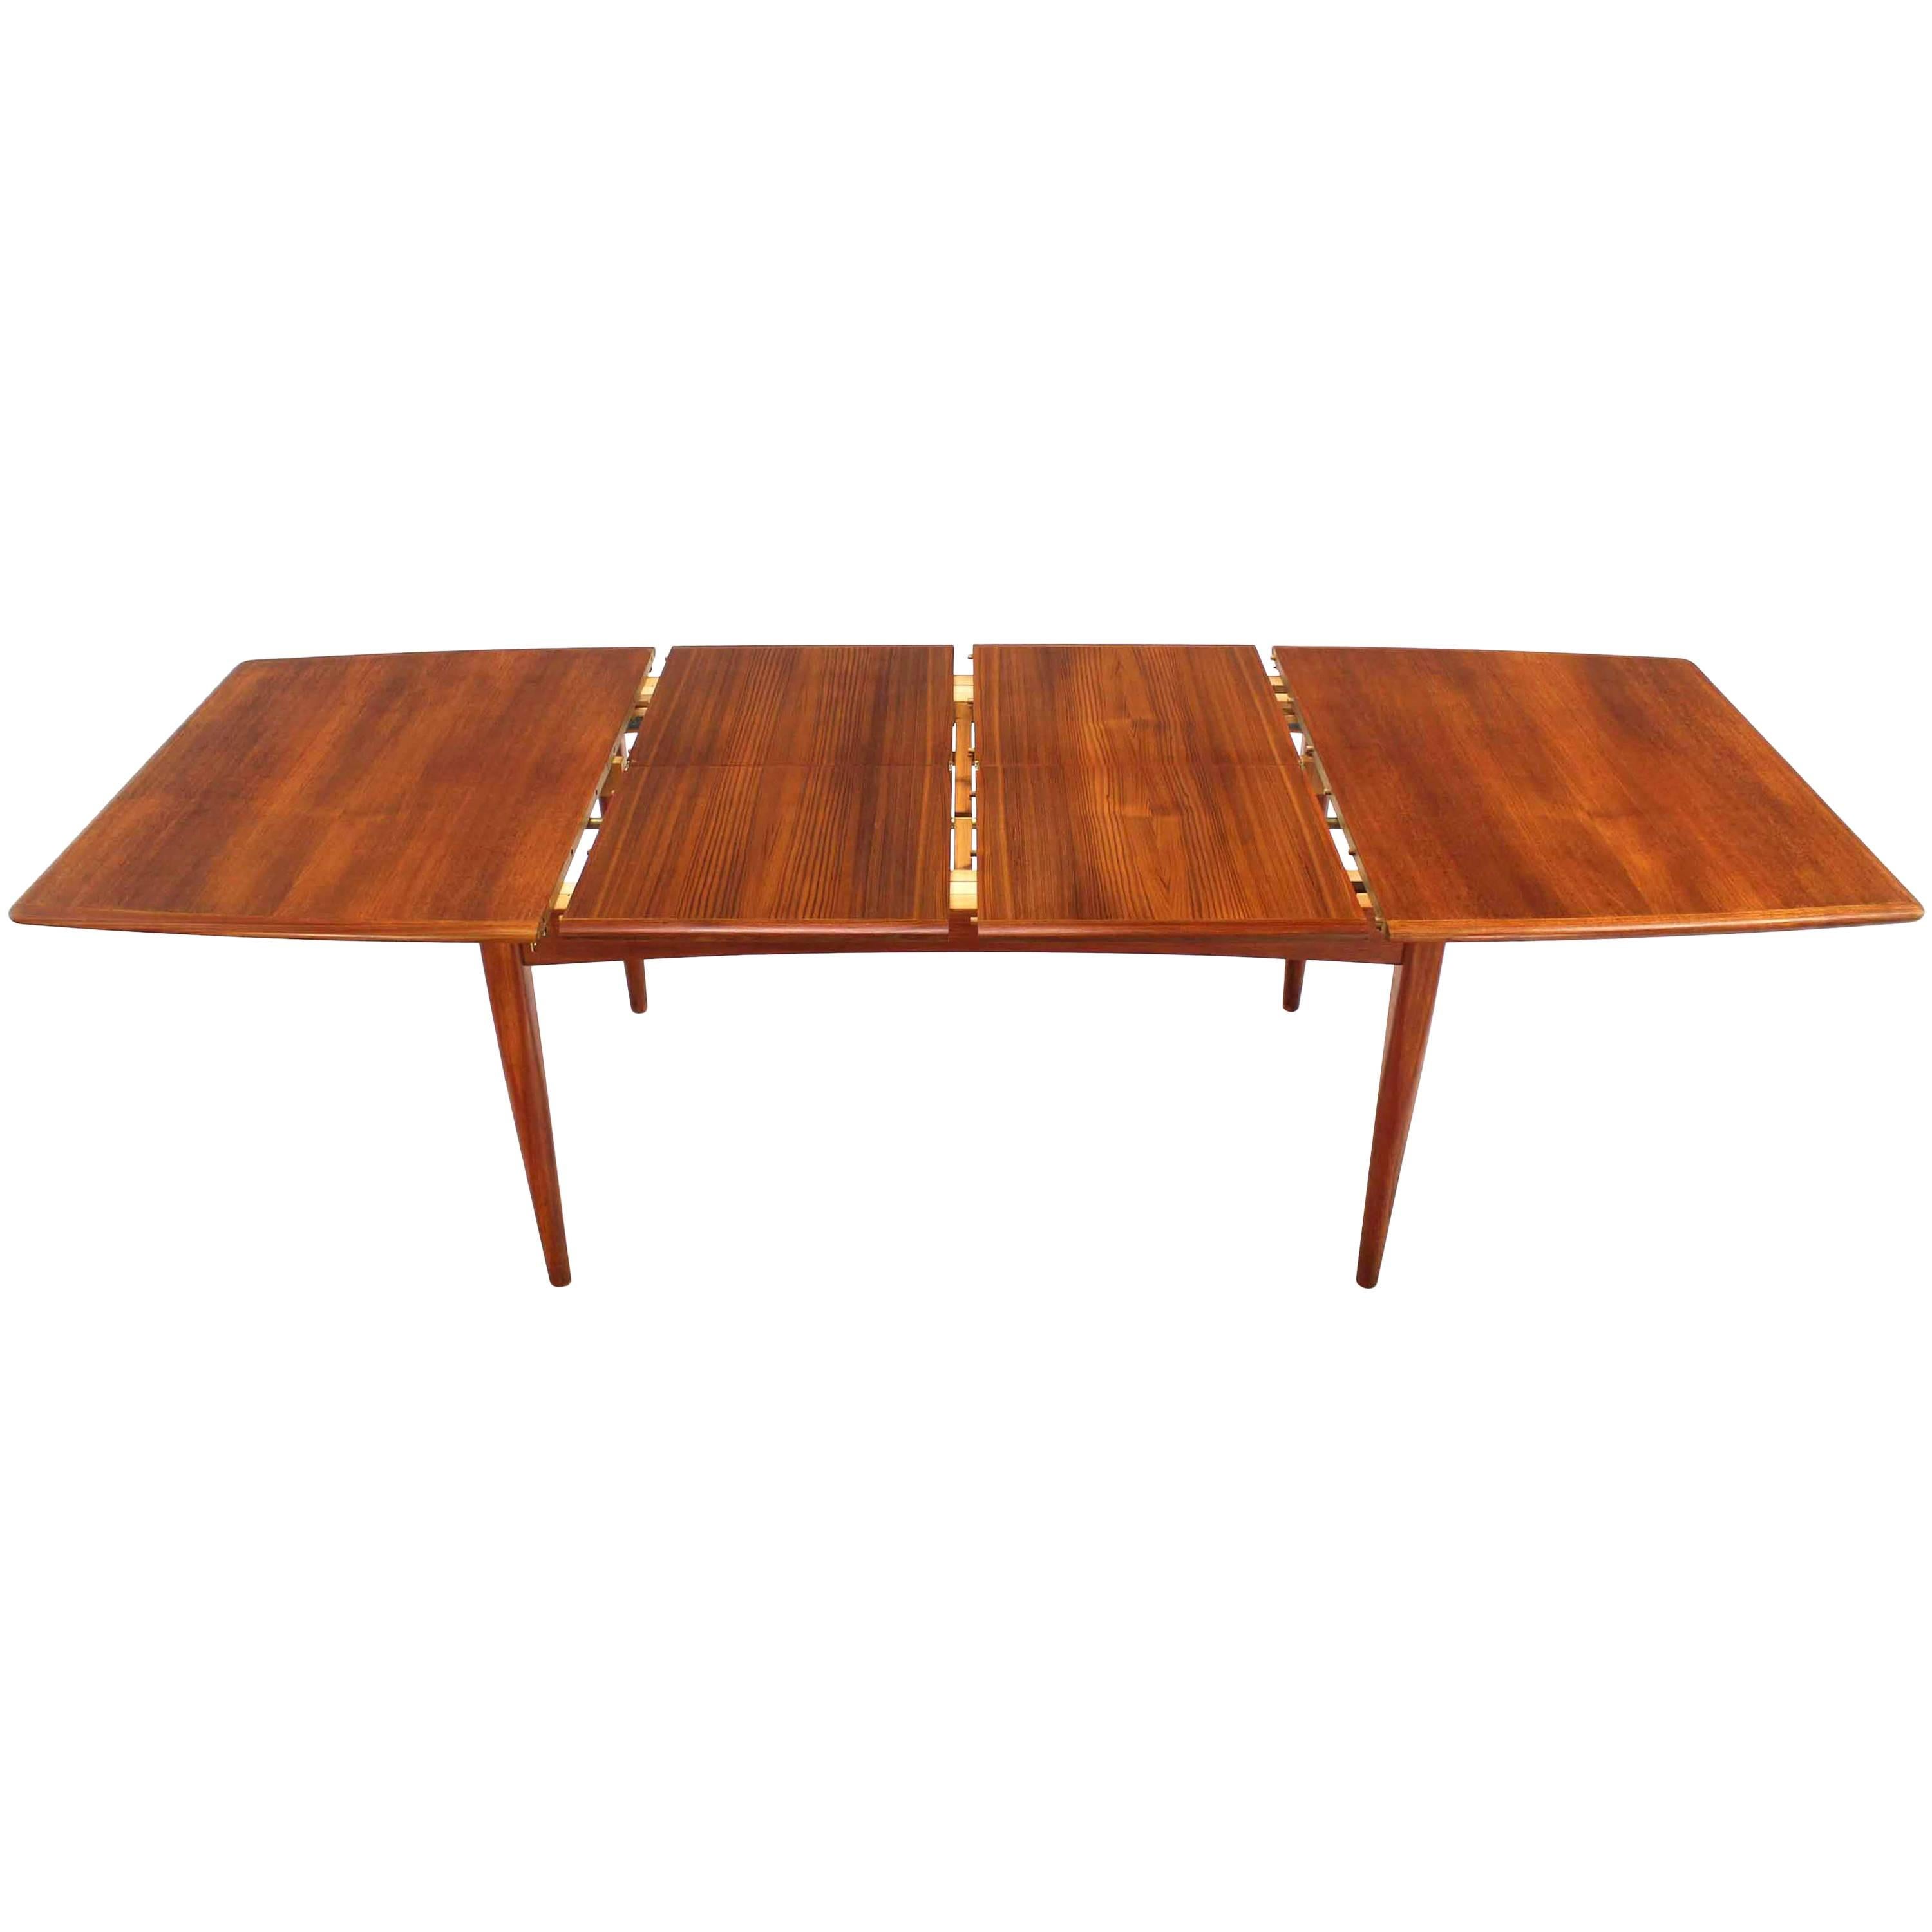 Danish Modern Teak Boat Shape Dining Table with Two Pop-Up Leafs Extension Board For Sale